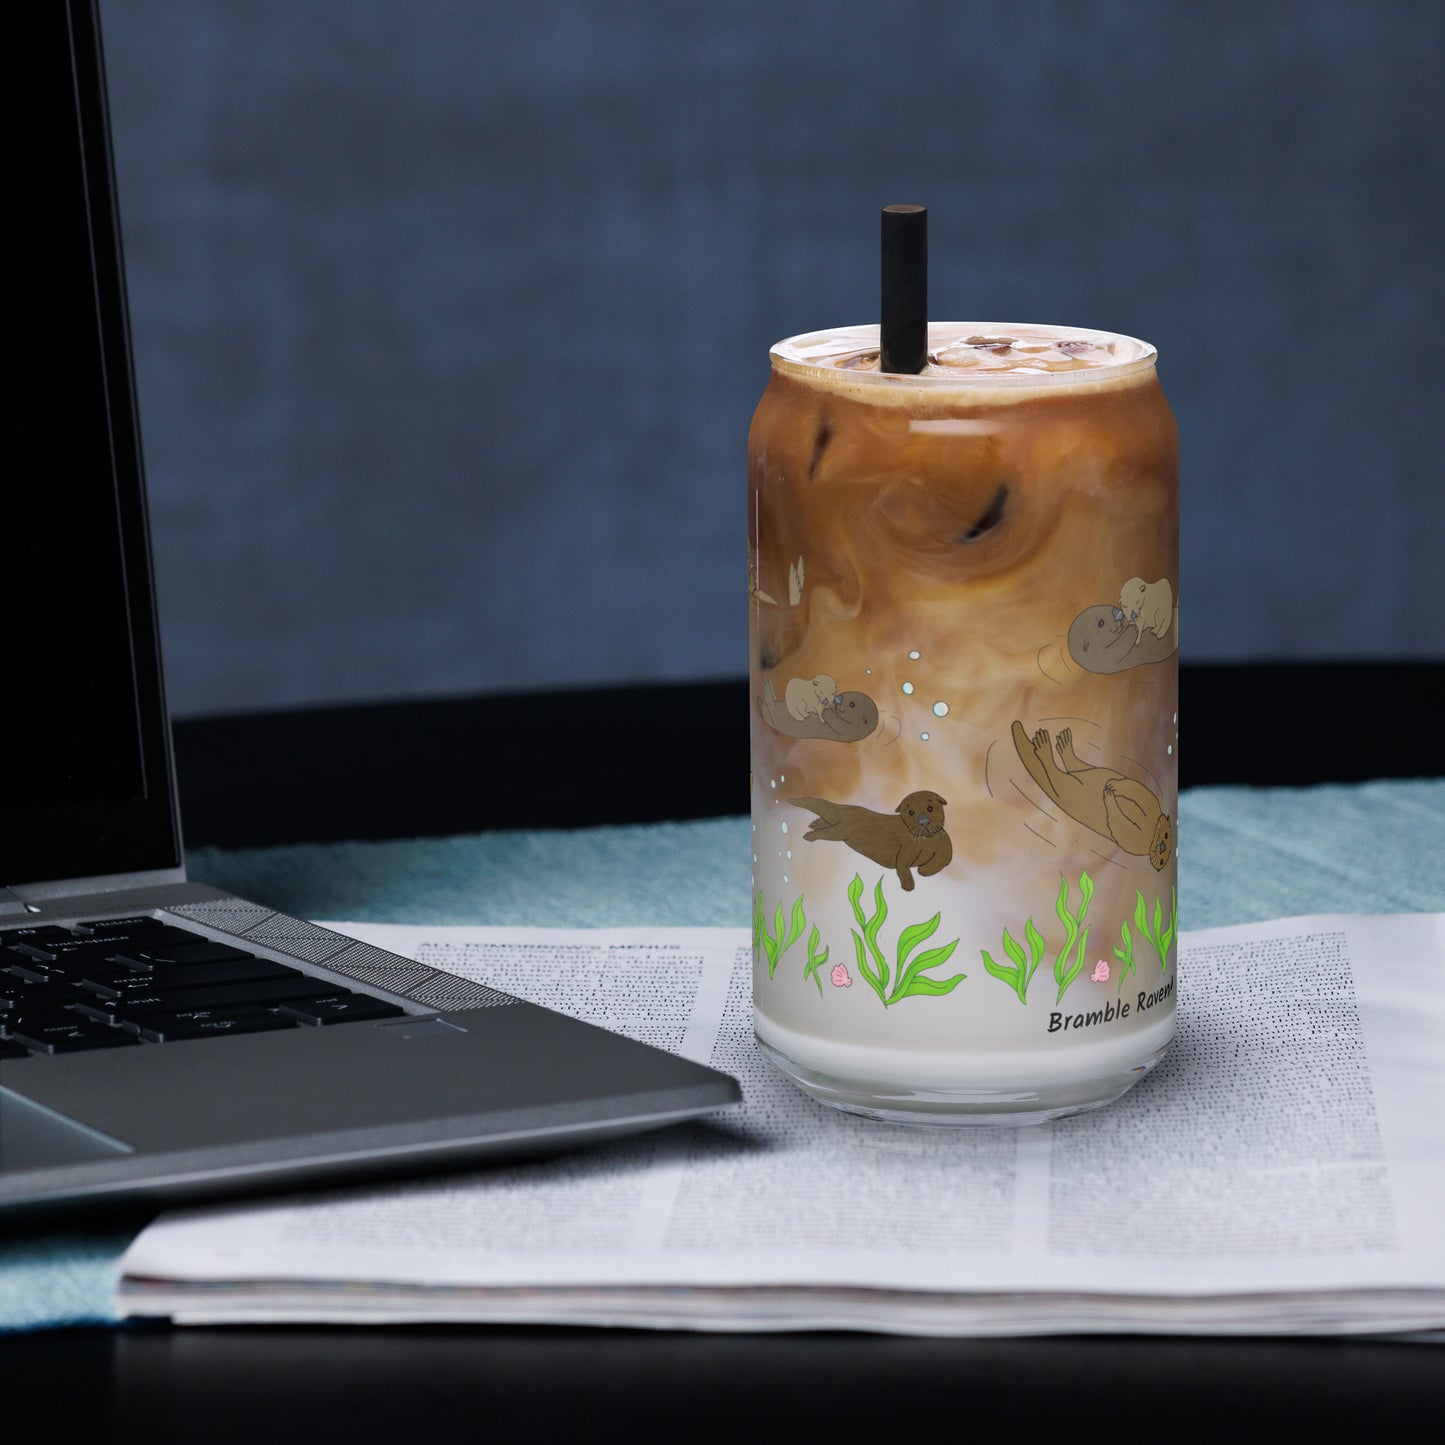 Can-shaped glass holds 16 fluid ounces. Has a design of sea otters swimming above the seaweed with bubble and shell accents. Filled with iced coffee and a straw, sitting by a laptop.